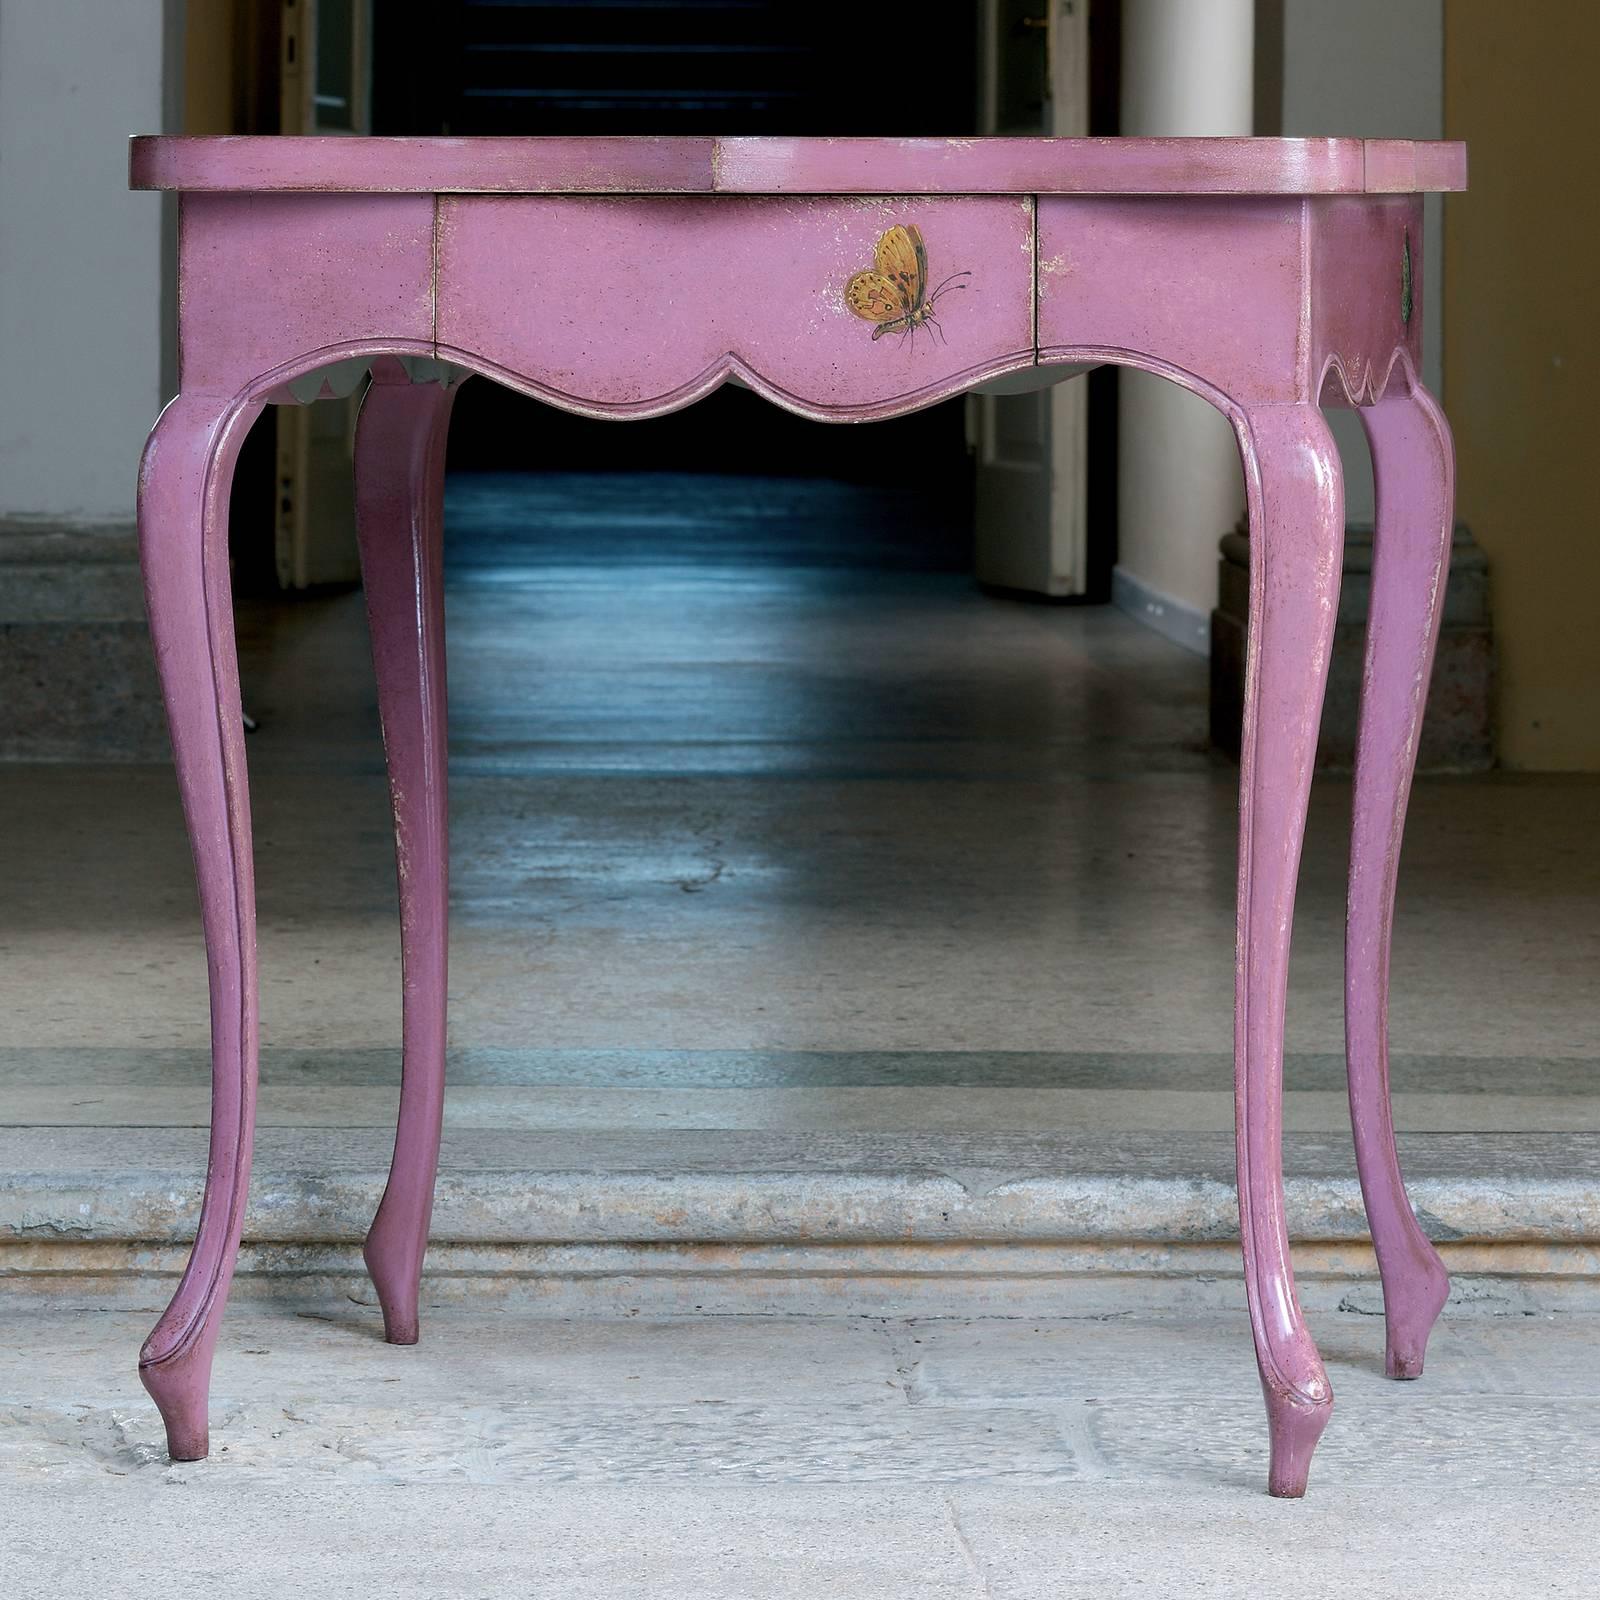 Named after one of the islands in the Venetian Lagoon, this console would be equally at home in a hallway, bedroom or living room as a dressing vanity, or even as a stylish serving table. Meant to rest against a wall, its elegant silhouette features